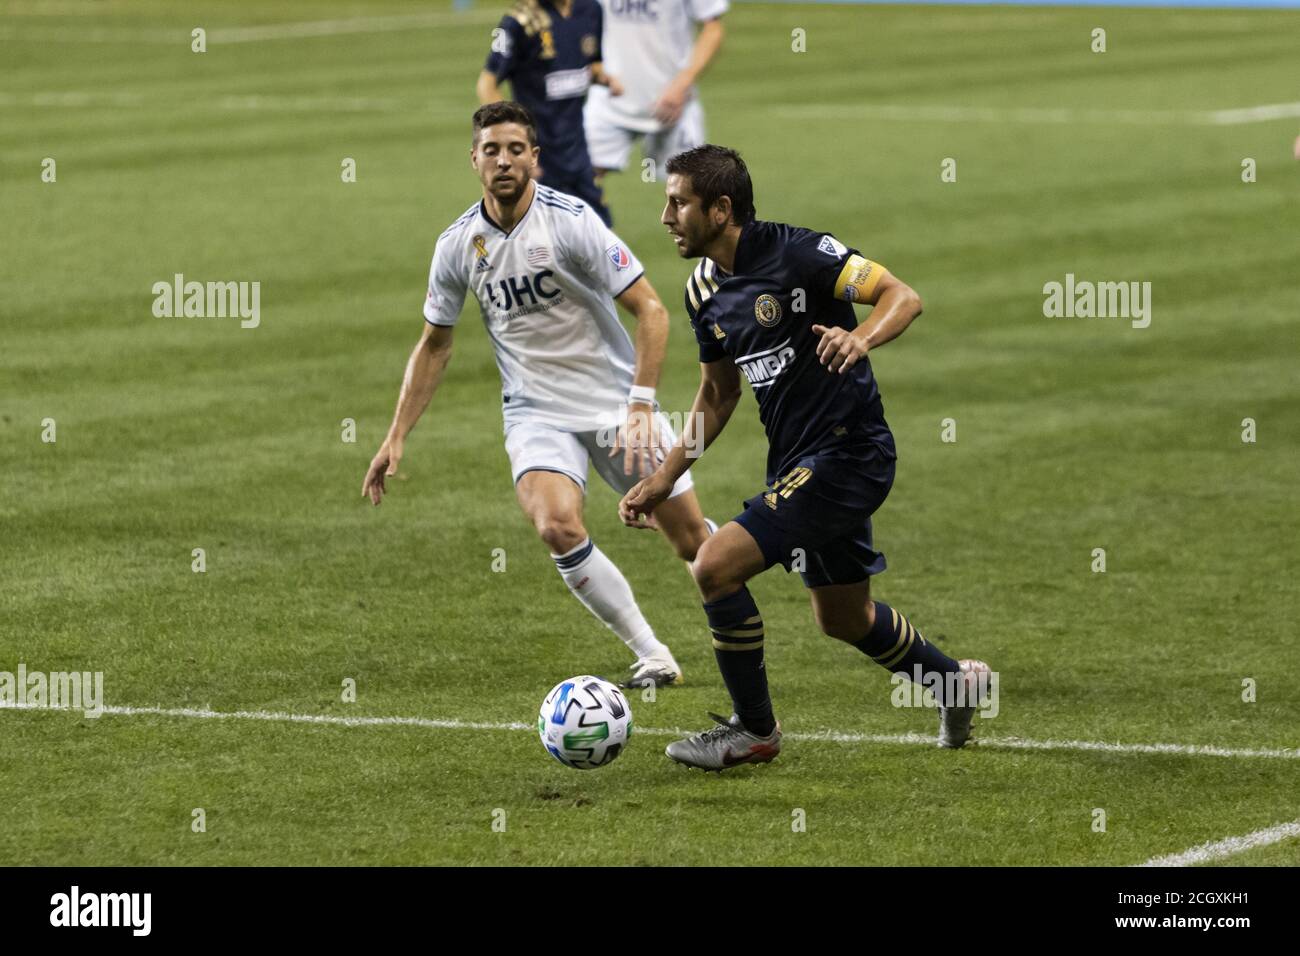 Chester, United States Of America. 12th Sep, 2020. Alejandro Bedoya during the Major League Soccer game between Philadelphia Union and New England Revolution at Subaru Park in Chester. Morgan Tencza/SPP Credit: SPP Sport Press Photo. /Alamy Live News Stock Photo